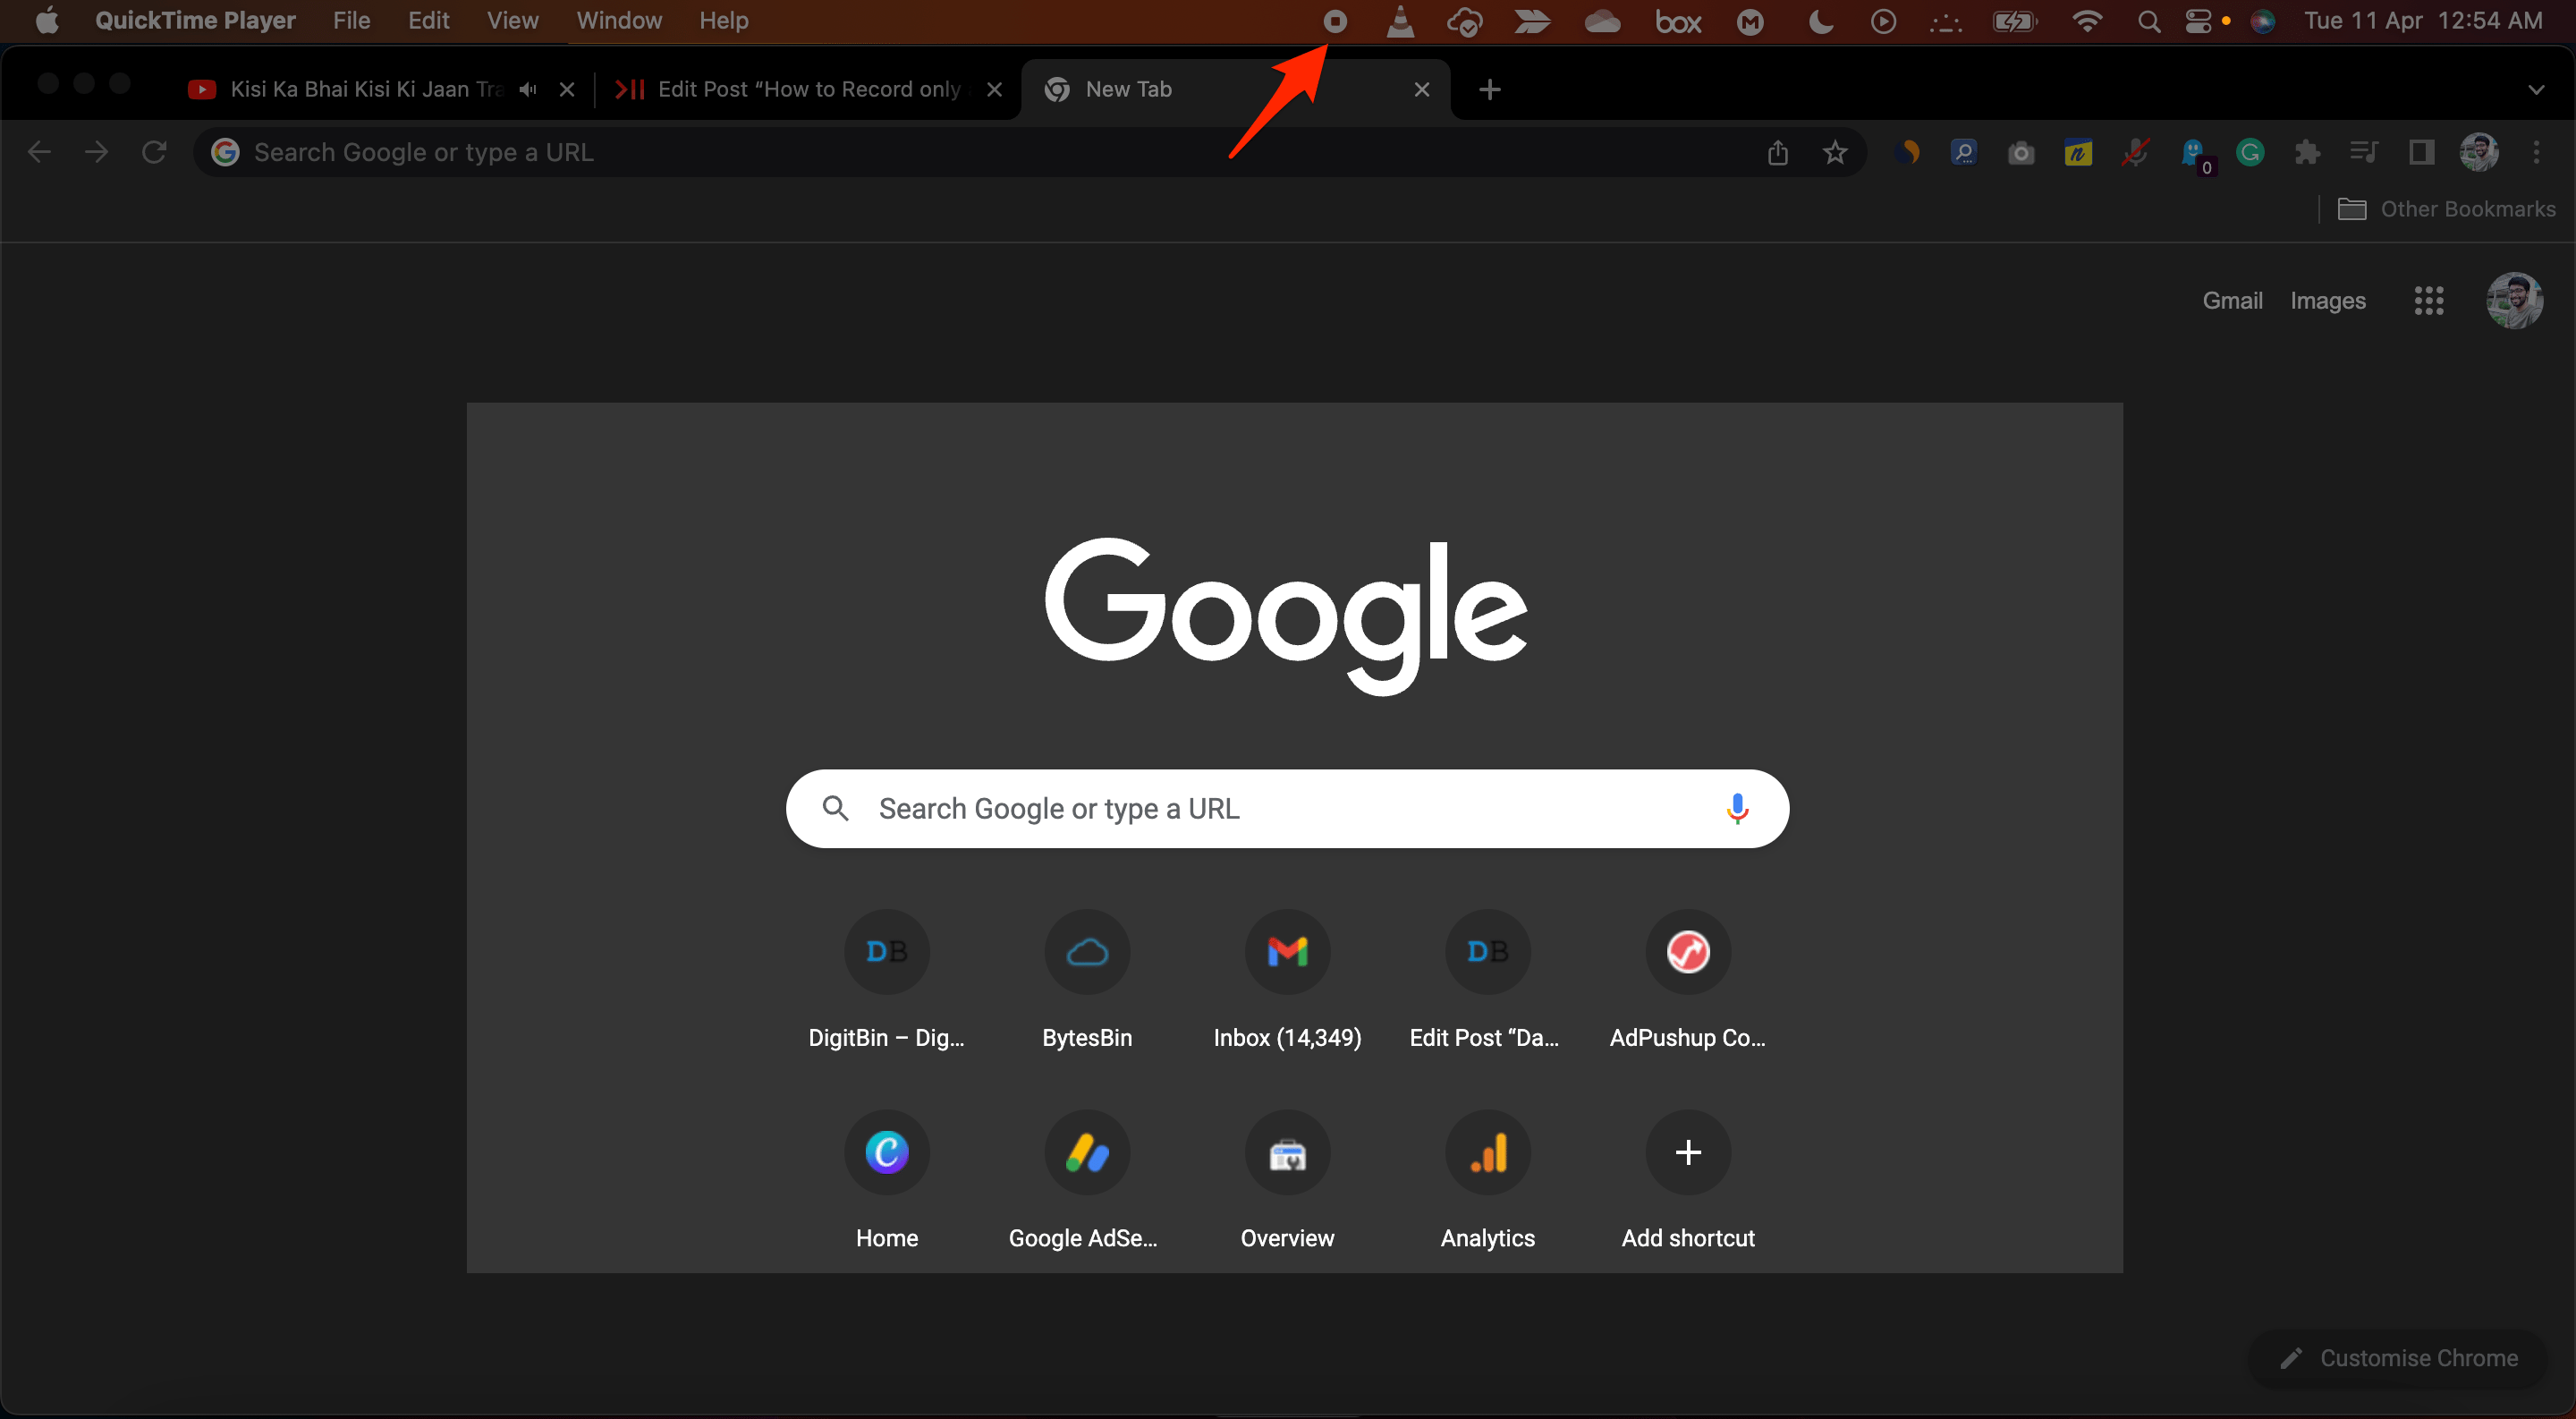 click on the stop icon on right menu bar